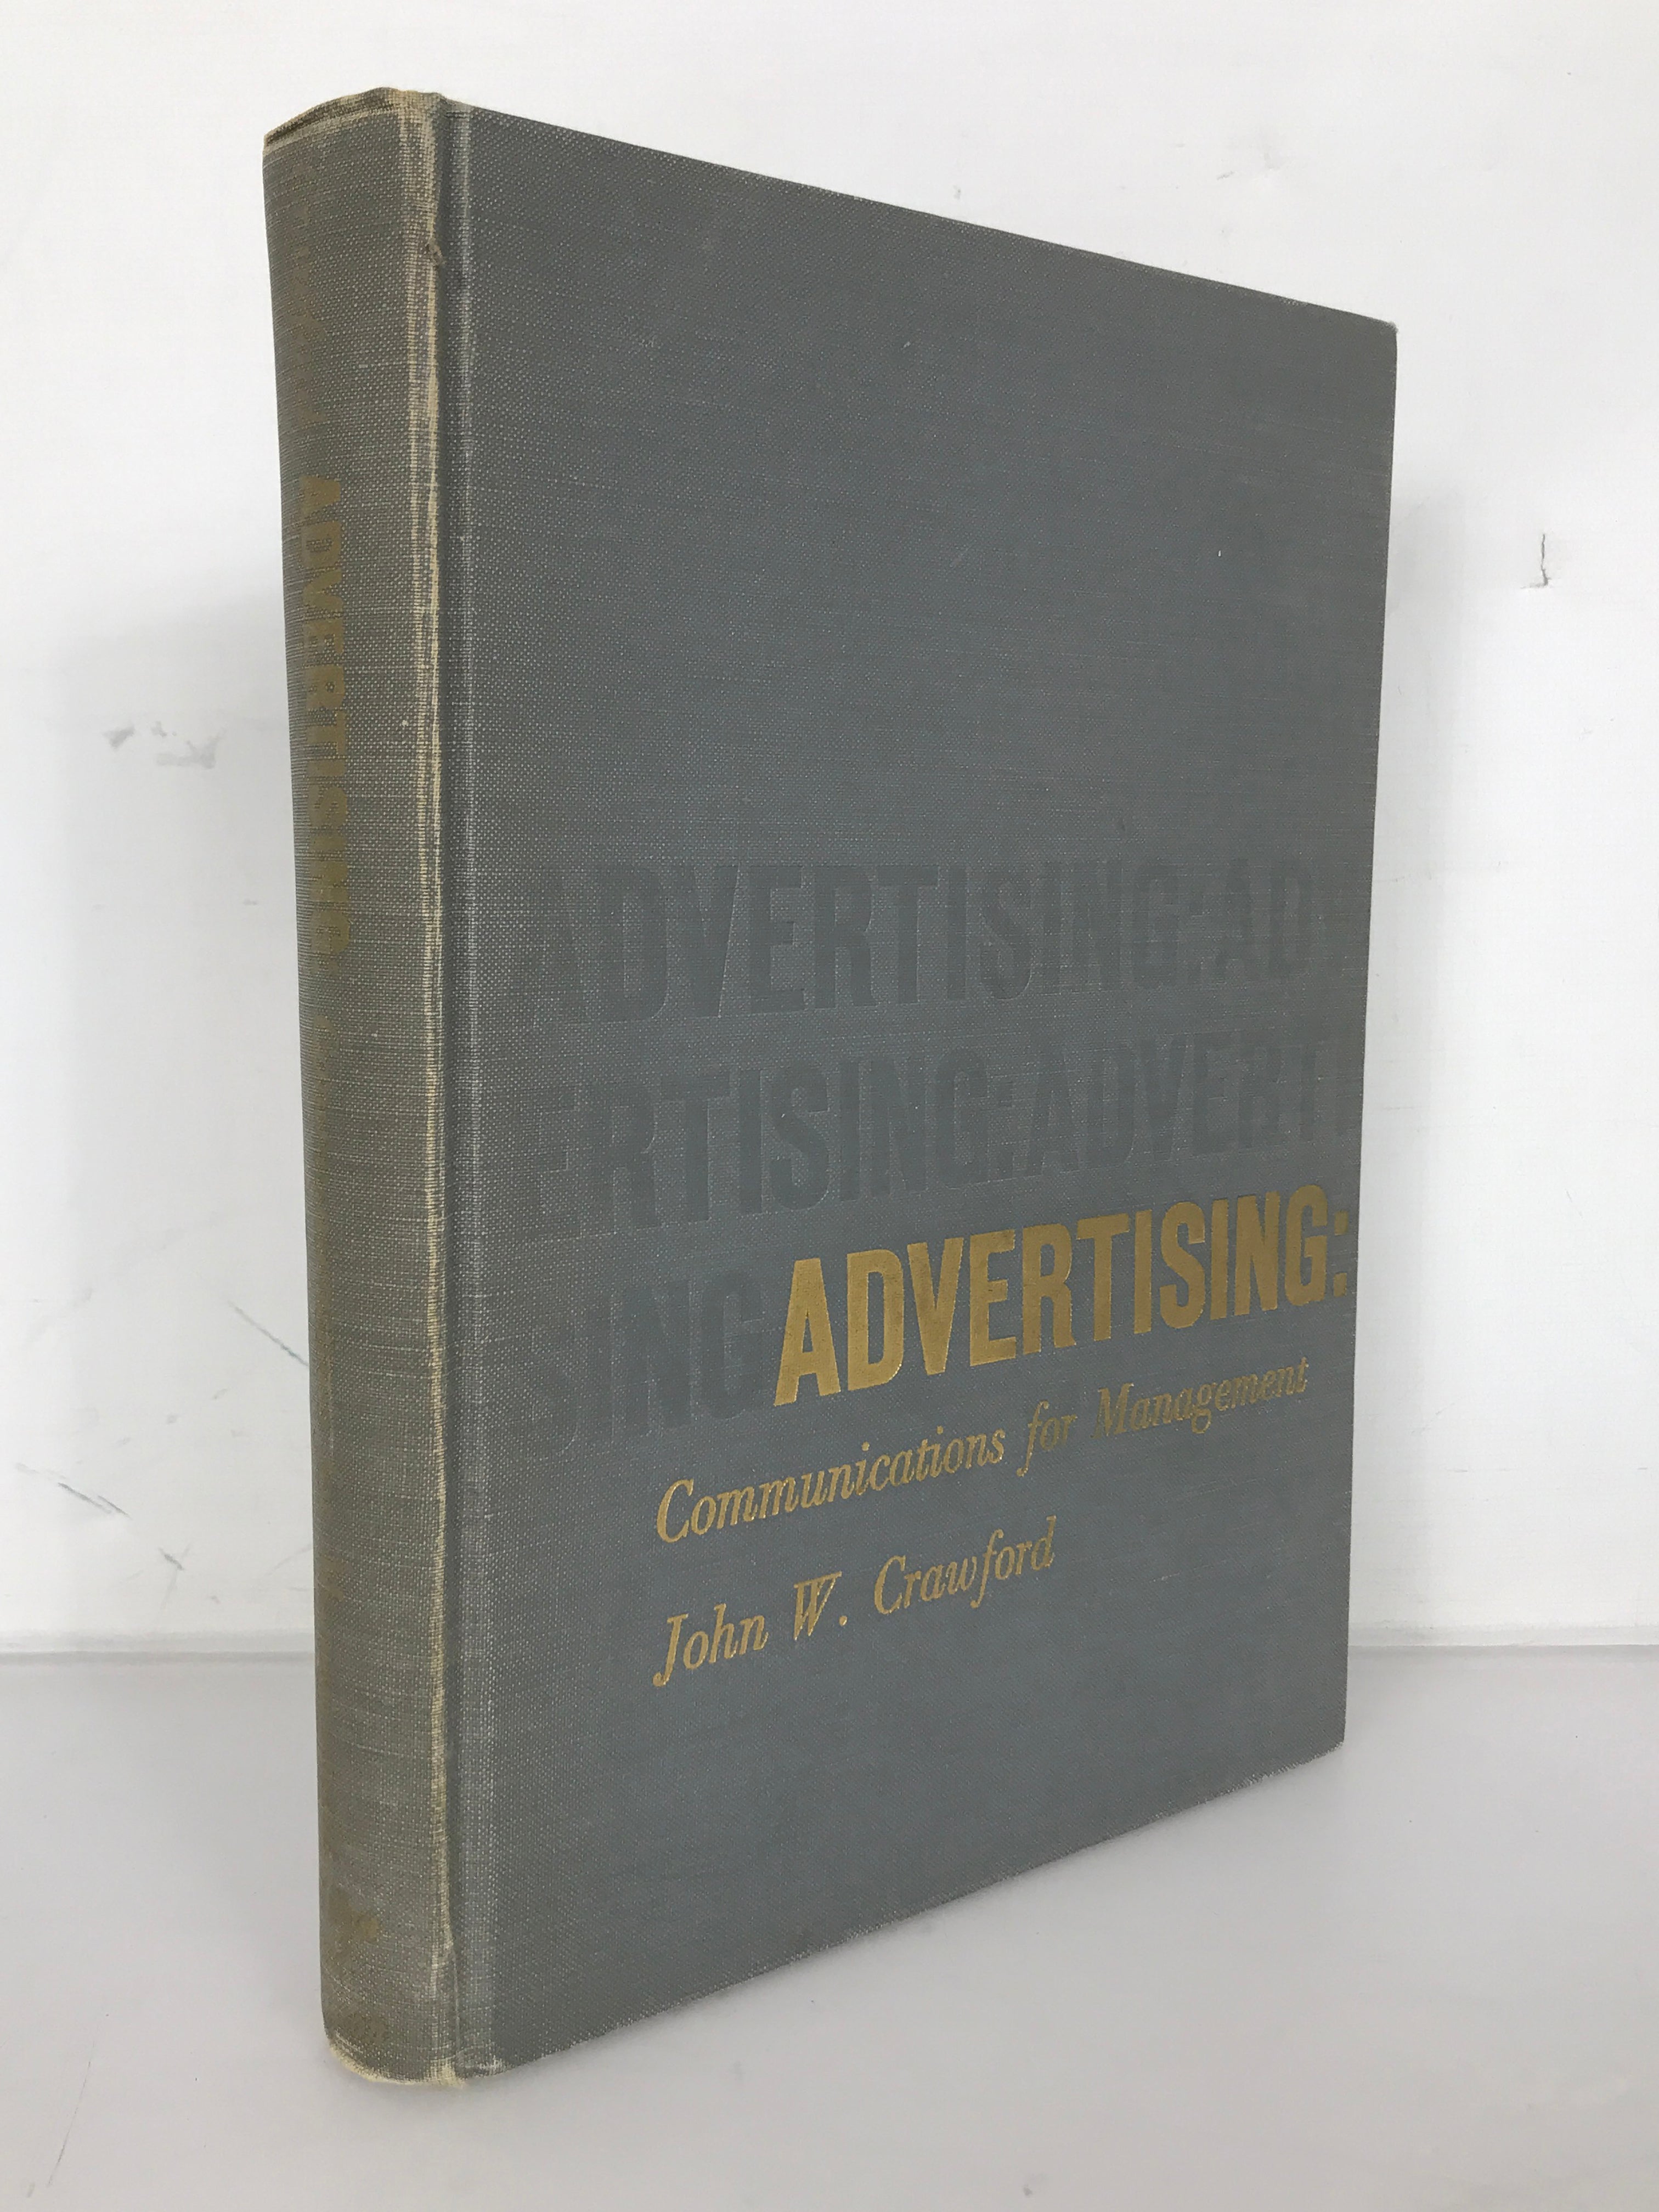 Vintage Textbook: Advertising: Communications for Management by John W. Crawford 1960 HC